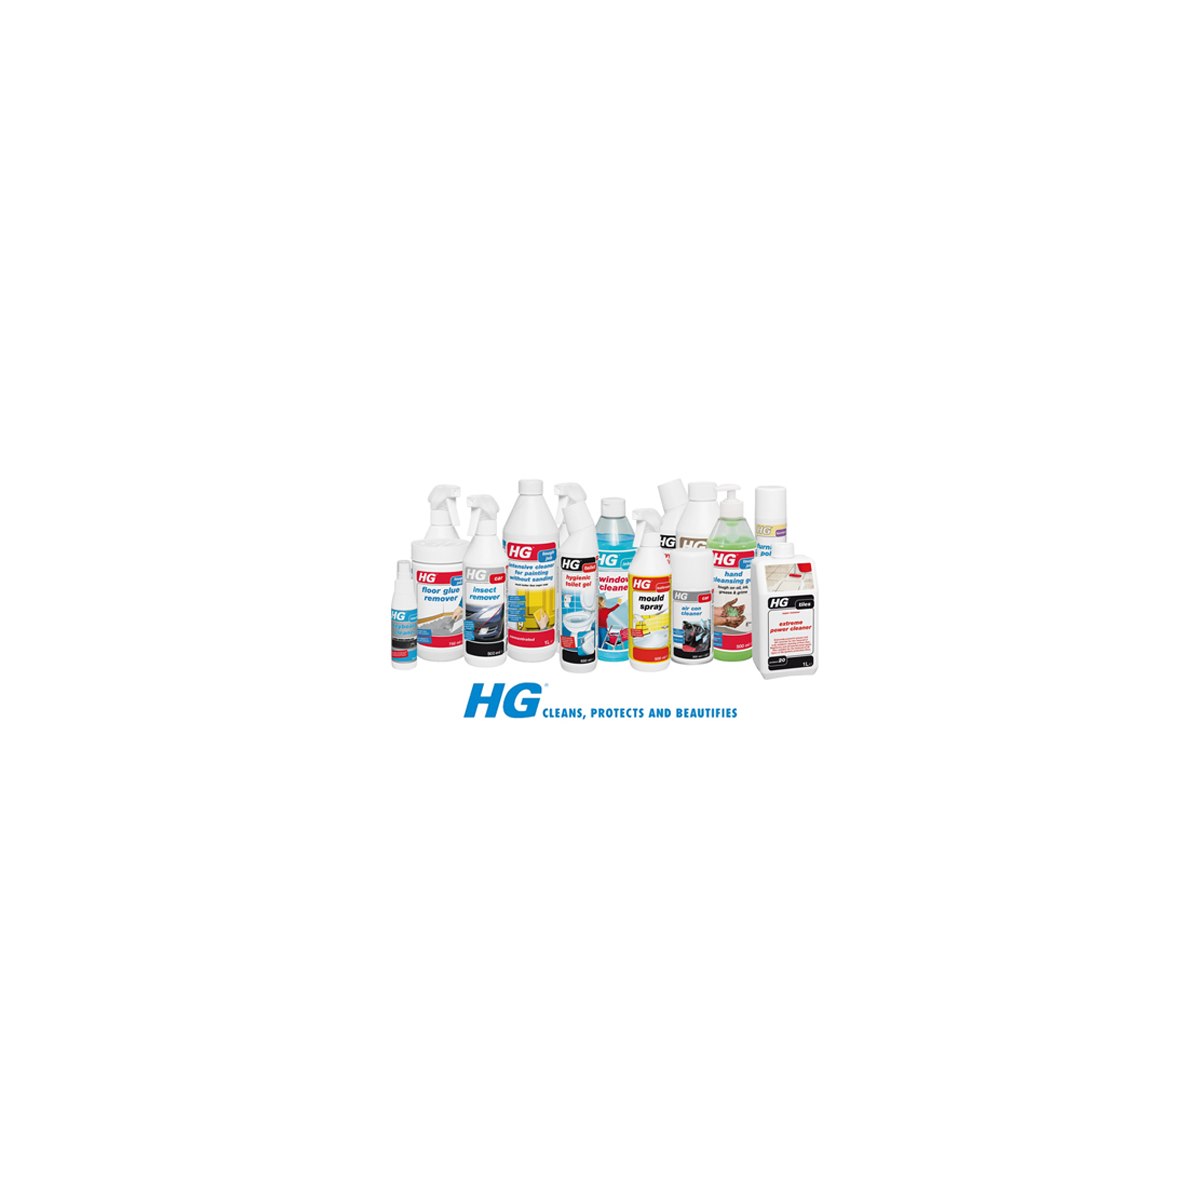 Where to buy HG Products Online